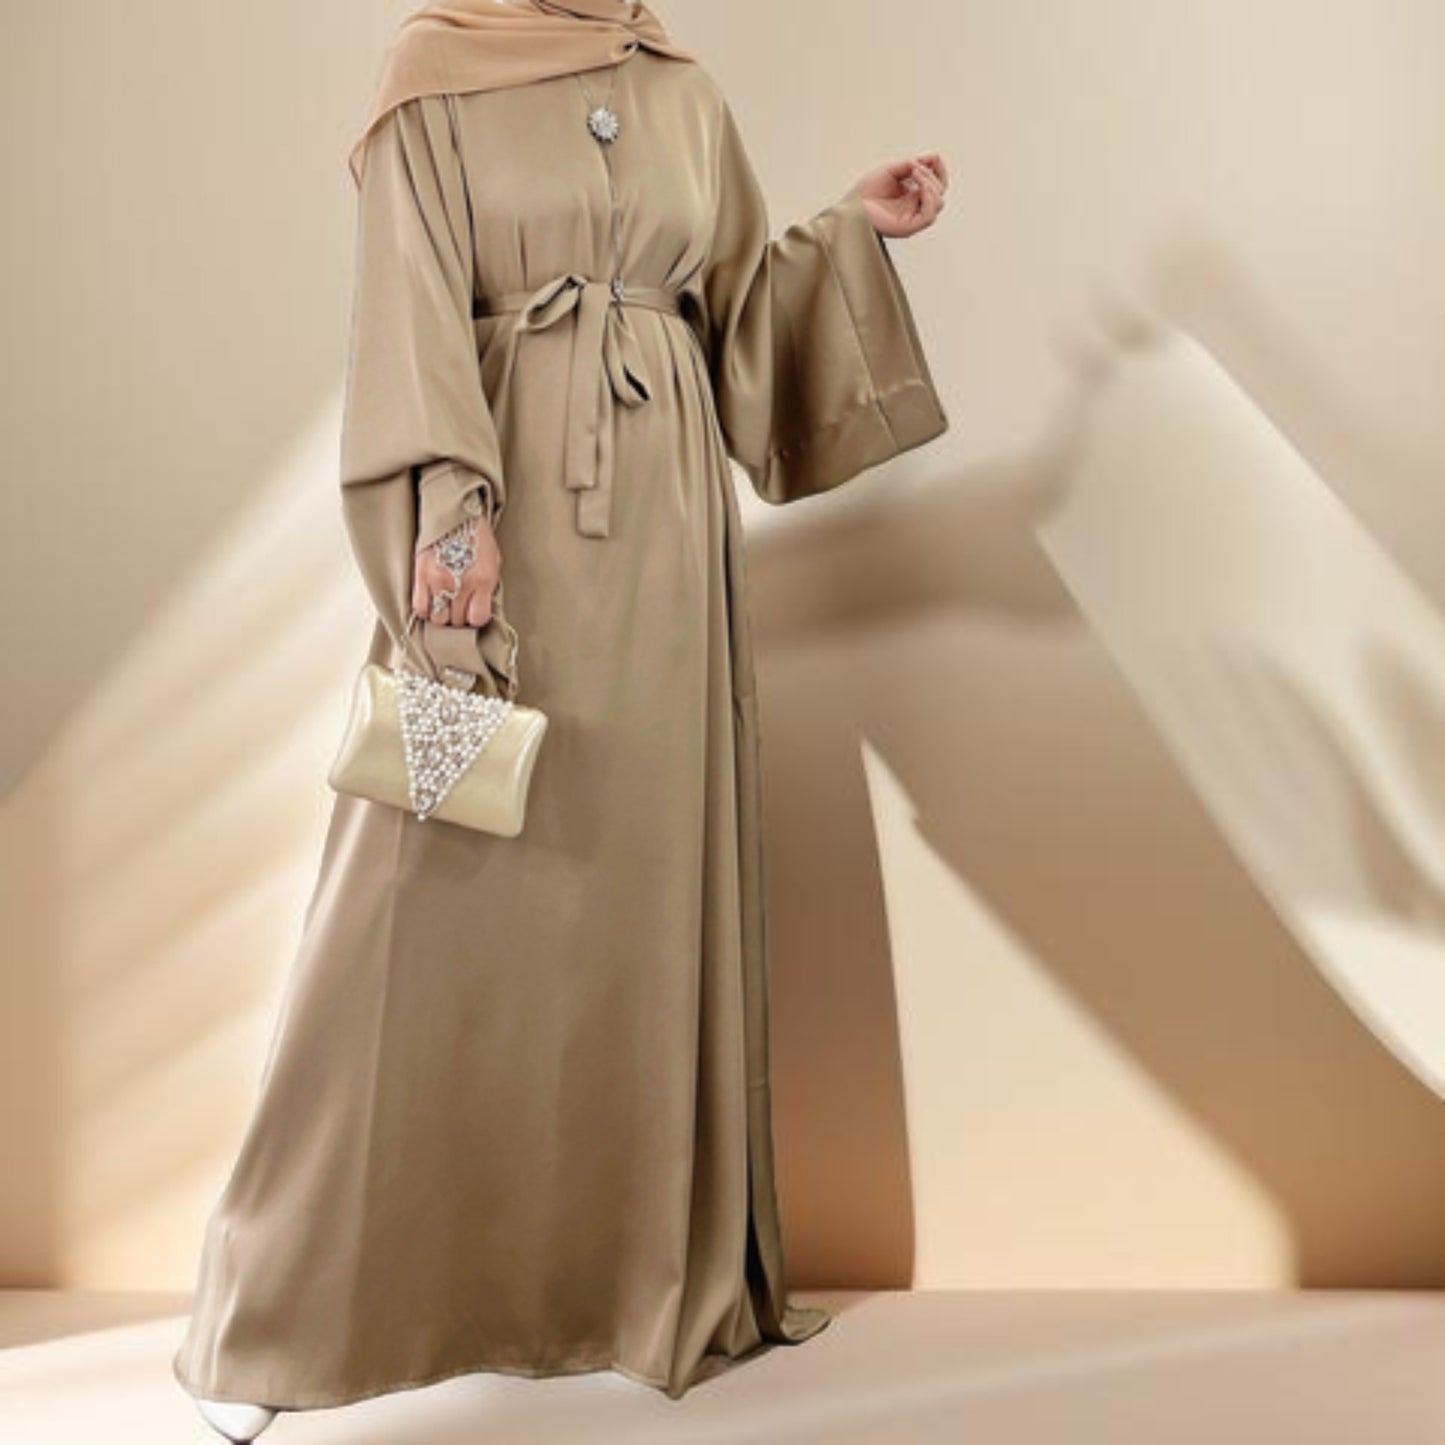 Lightweight plain abaya with long sleeves - Try Modest Limited 